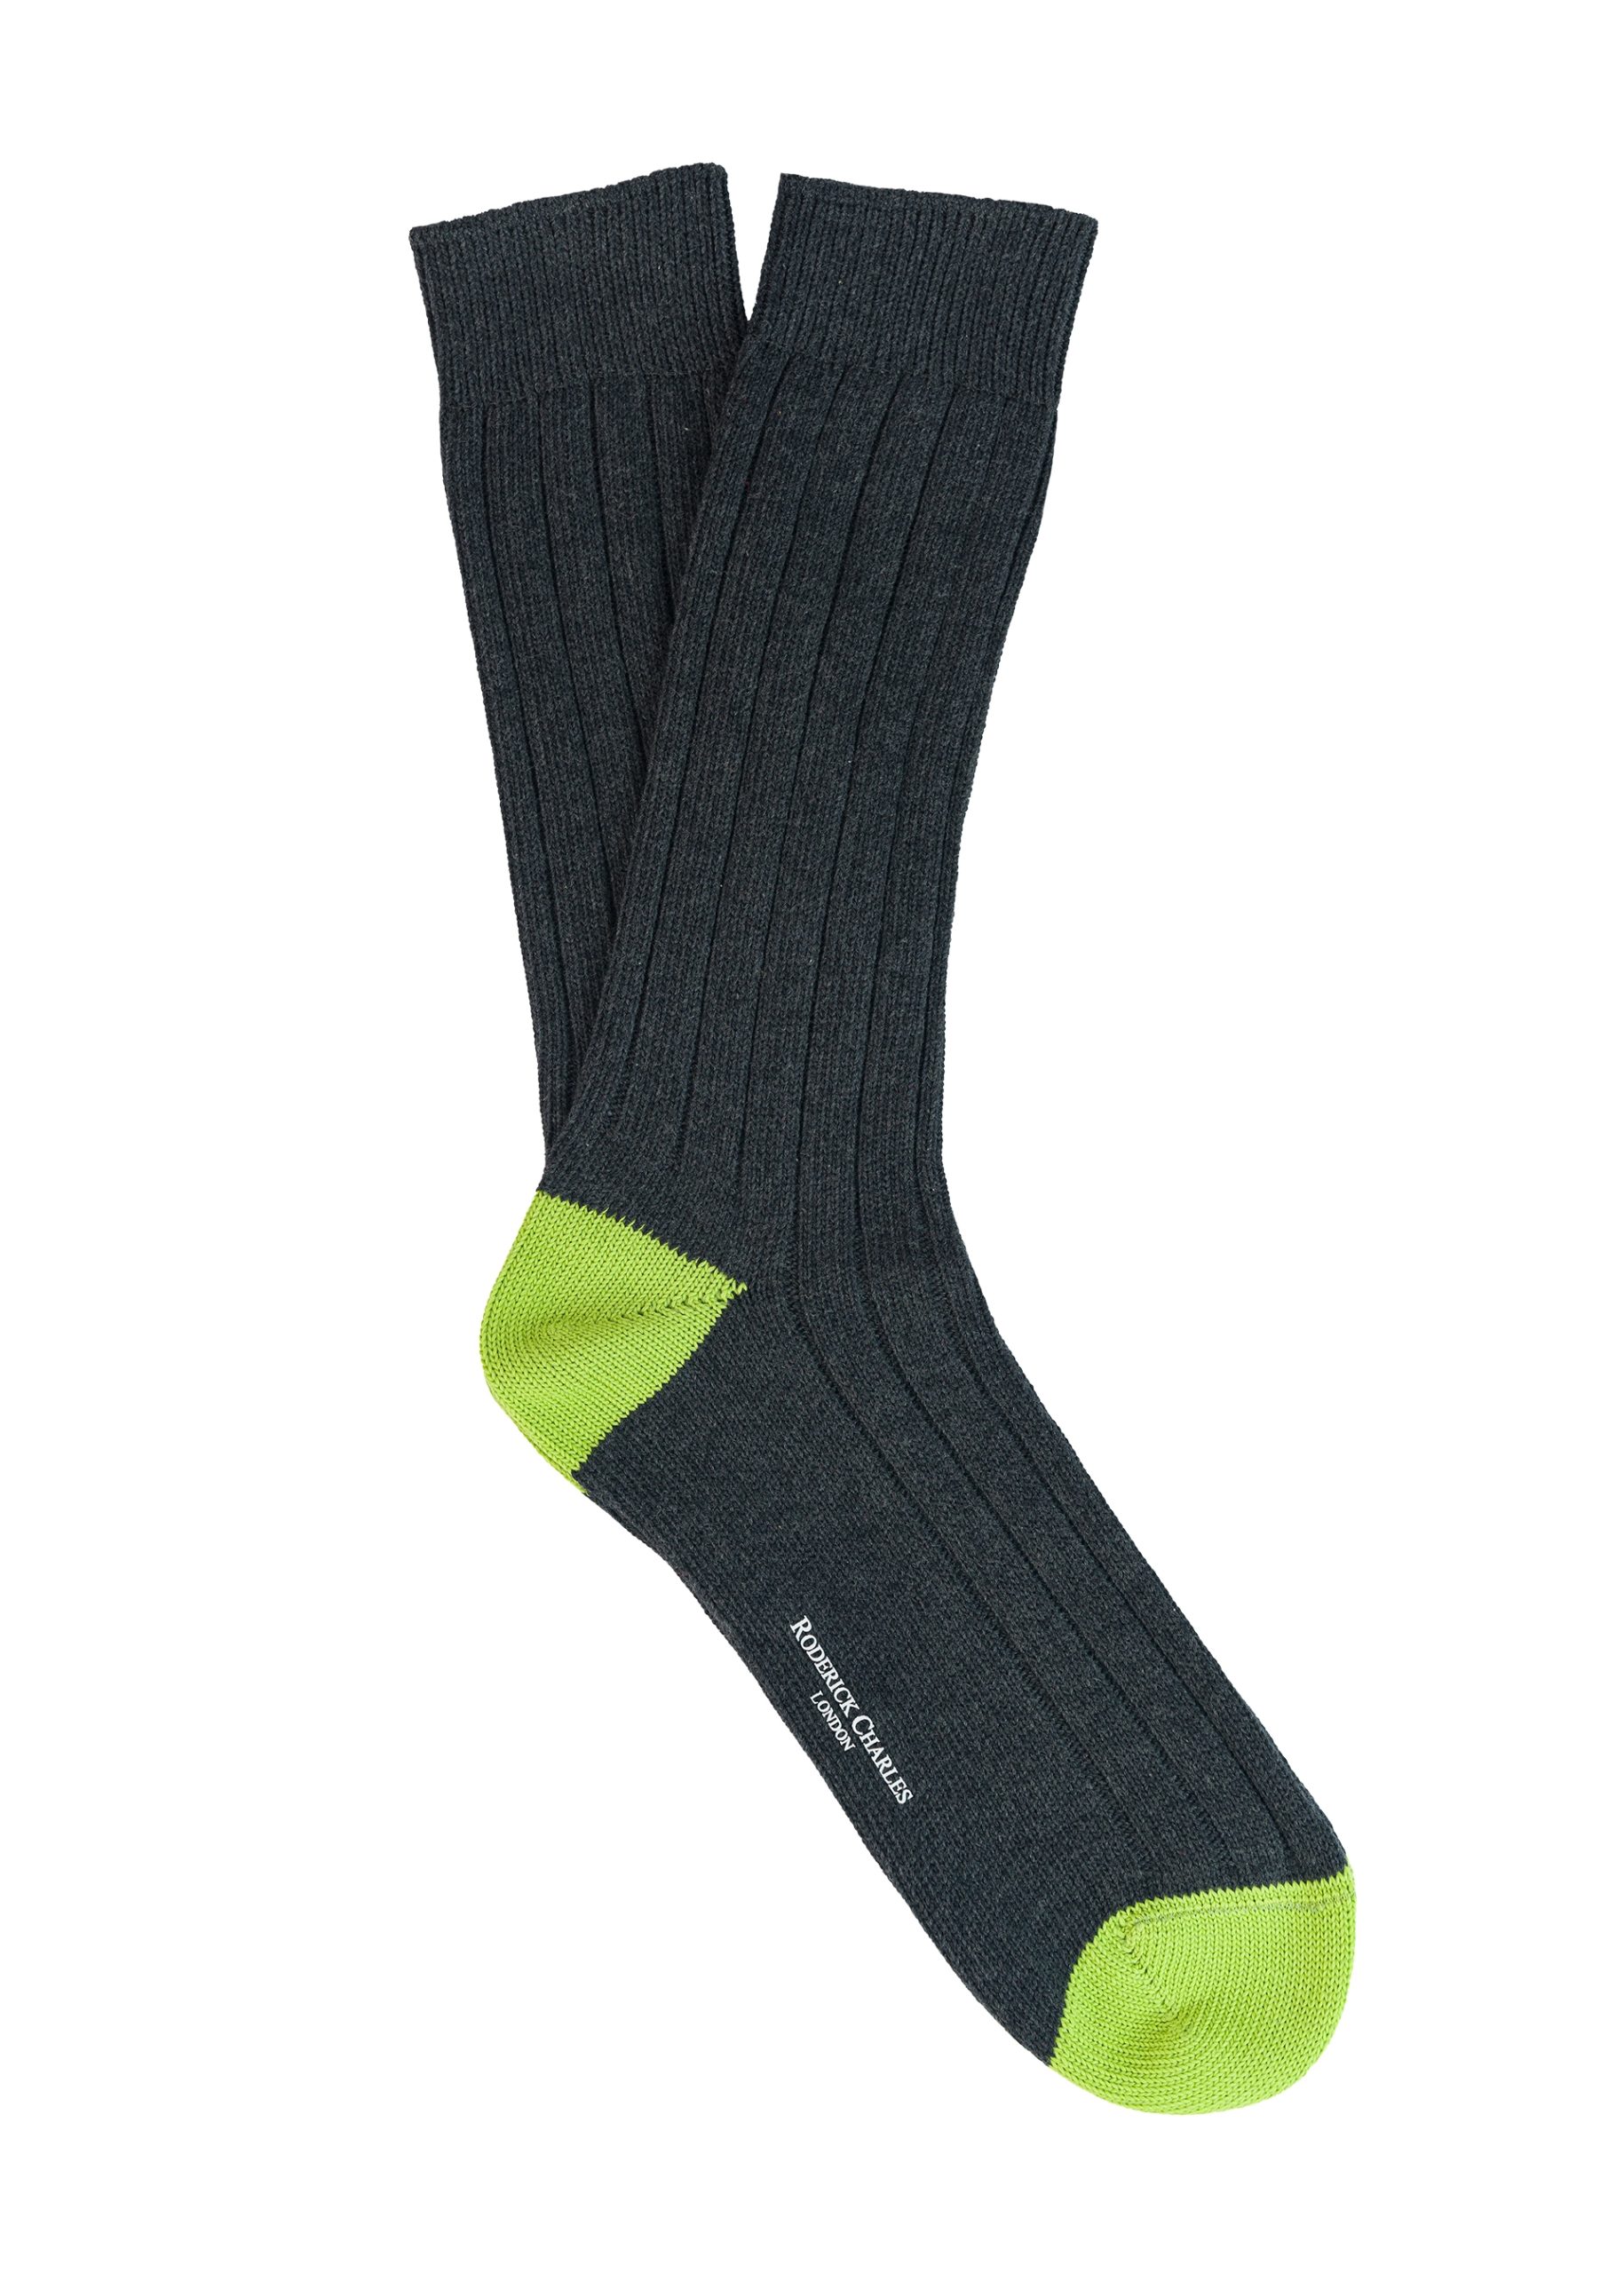 Fun grey sock for a man with bright green heel and toe.